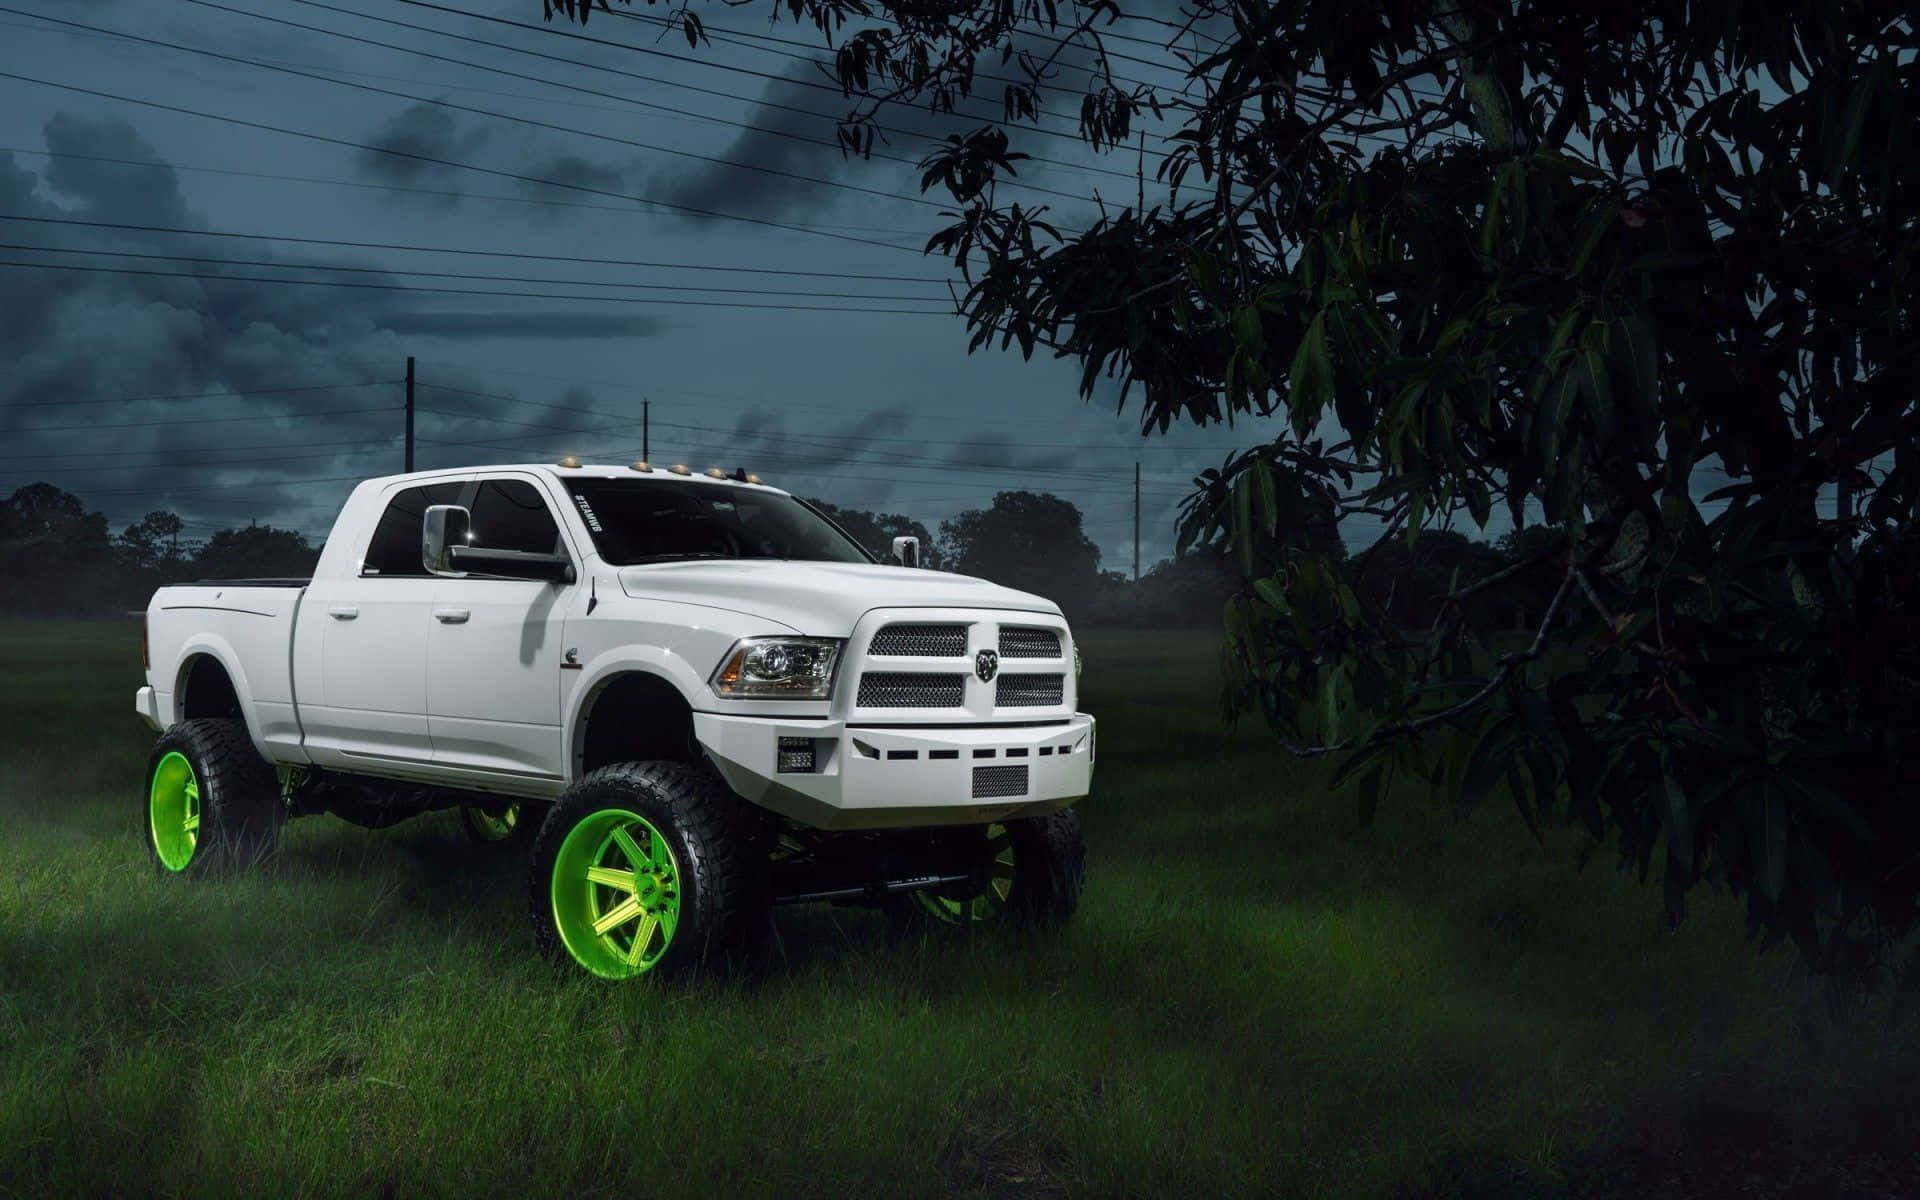 A White Truck With Green Wheels In The Grass